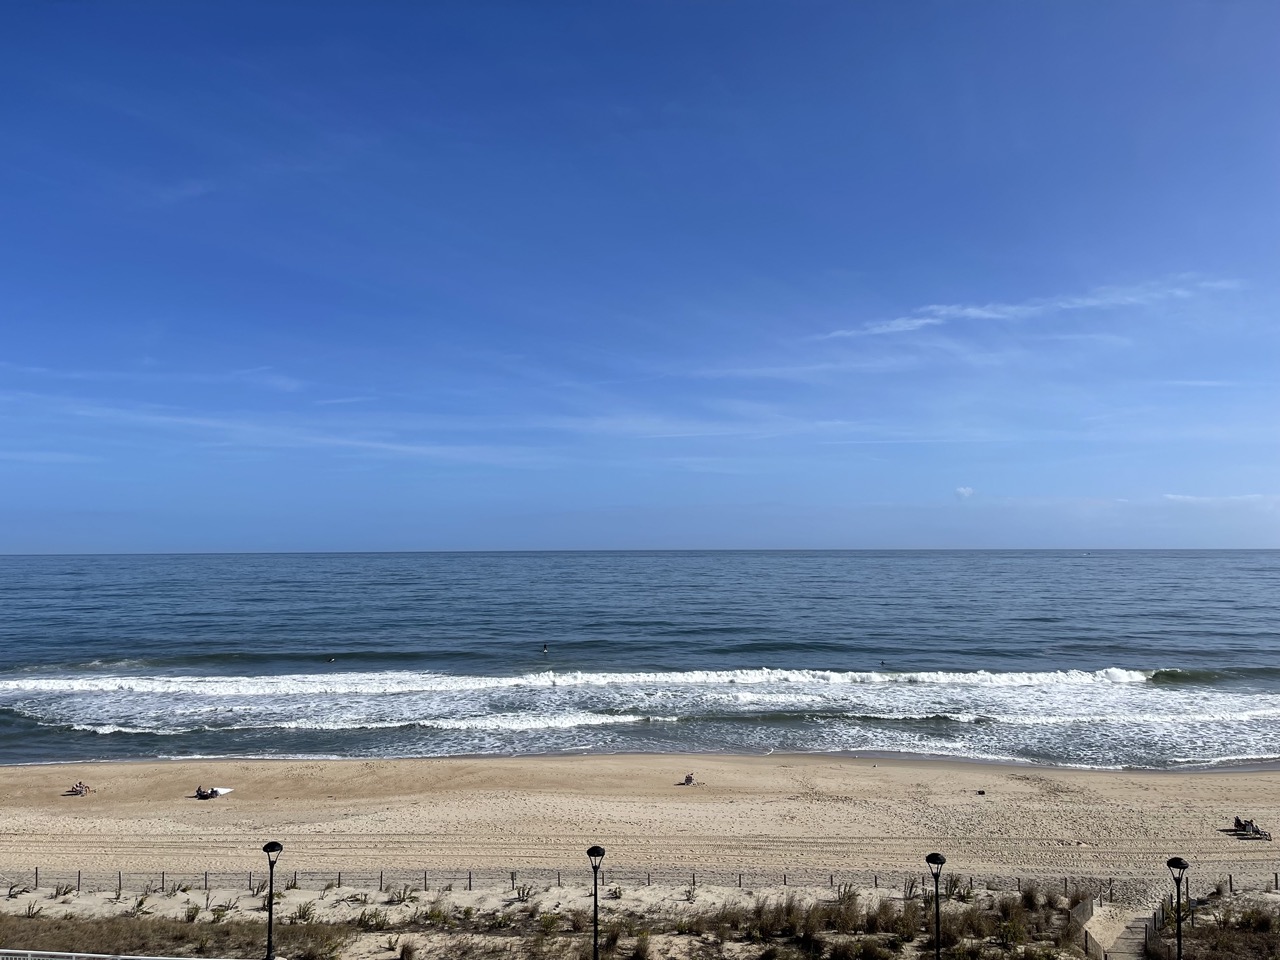 The beach, with the Atlantic Ocean beyond, shot from a fair height